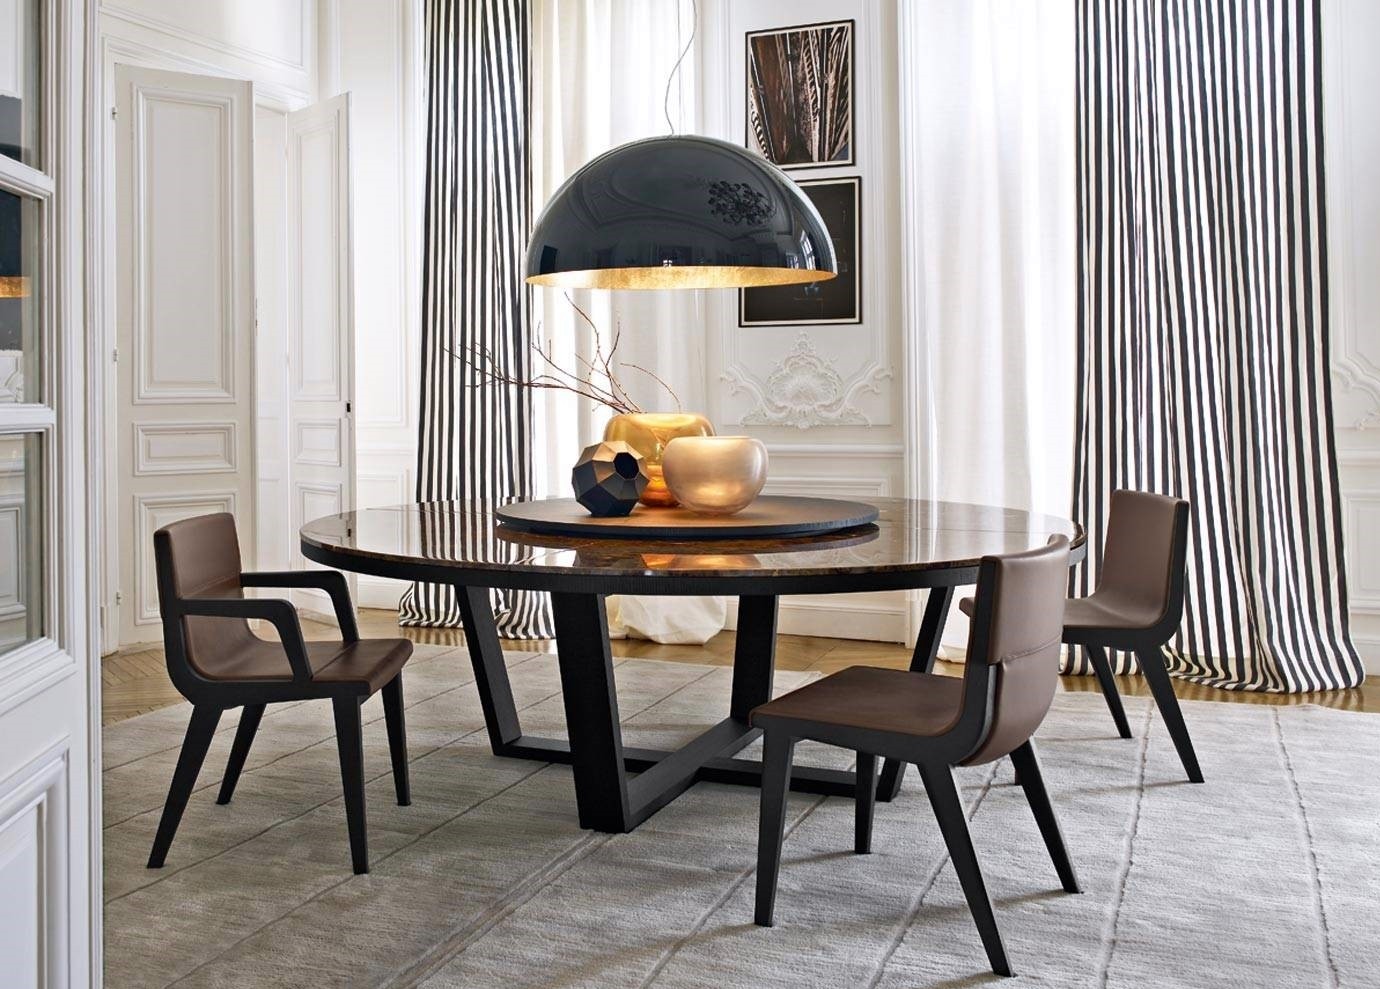 How To Adorn A Circular Dining Table